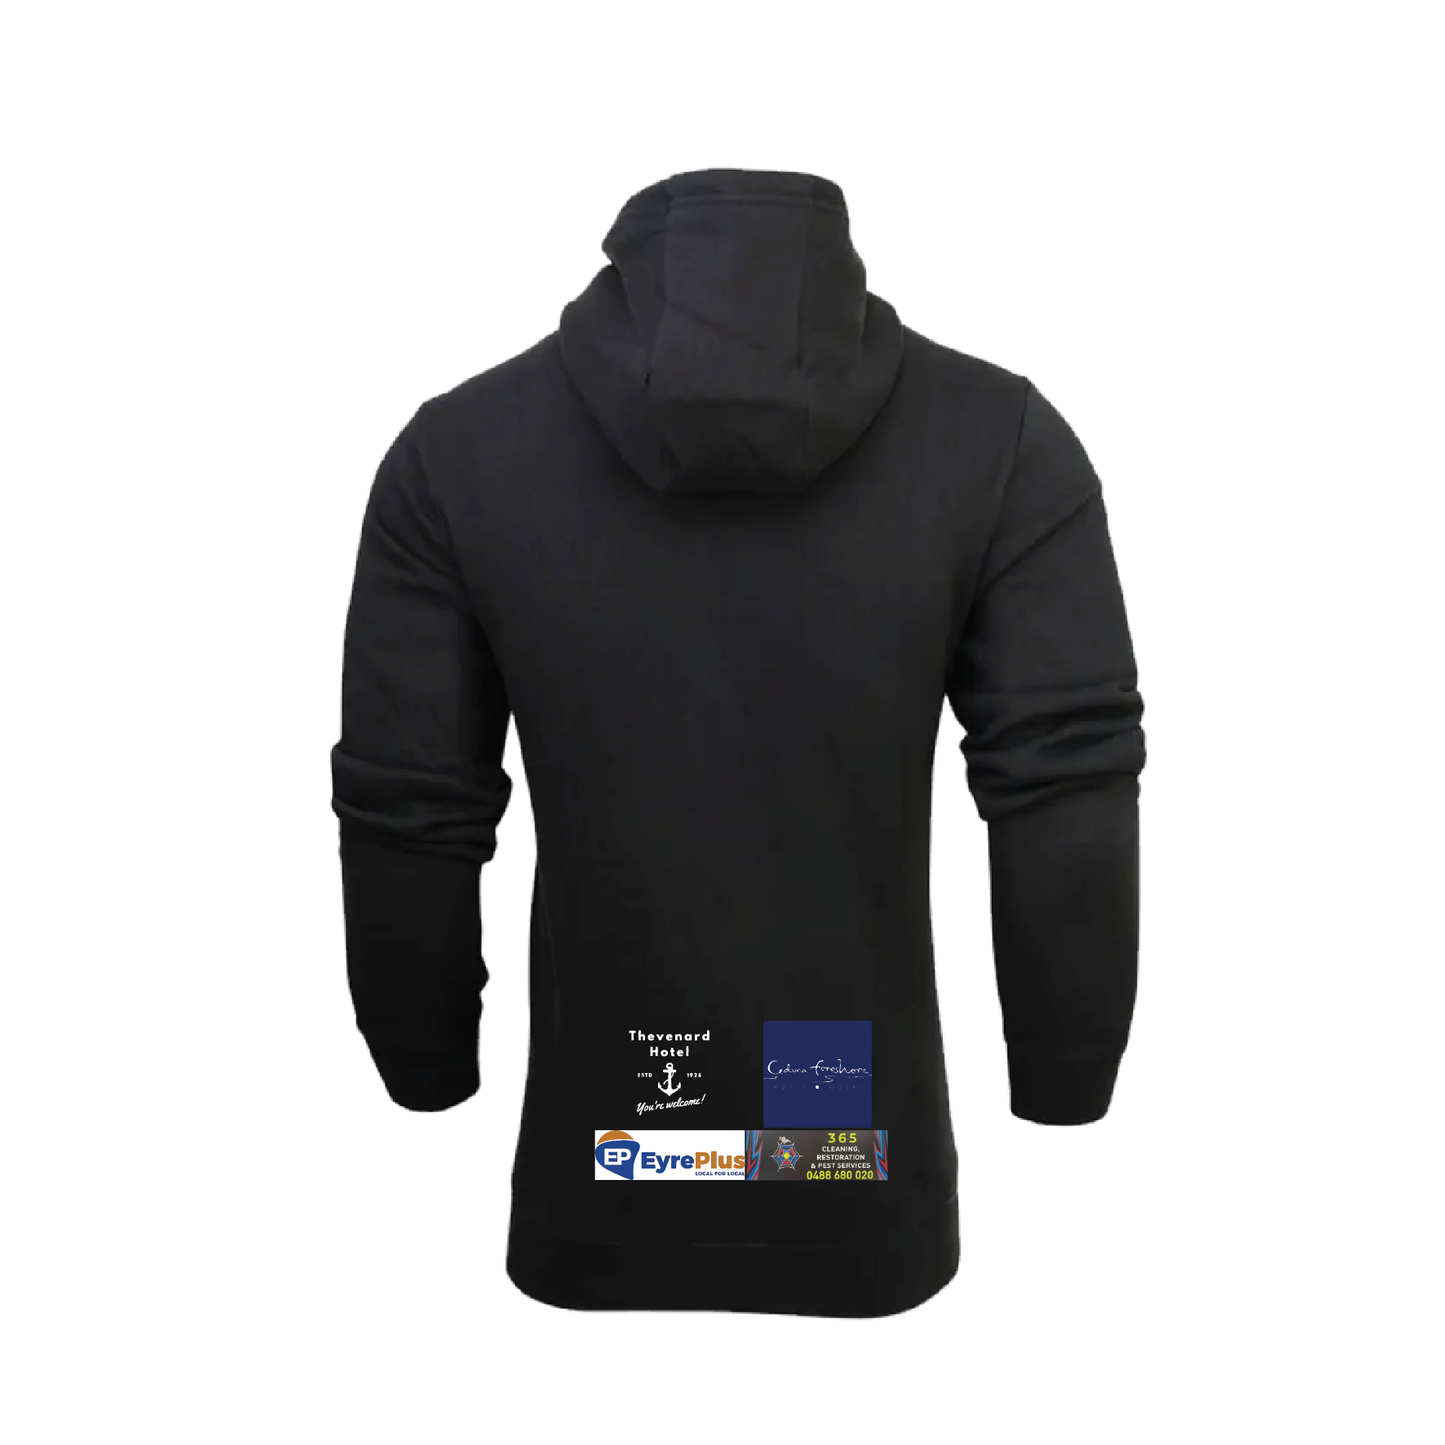 THEVENARD SPORTS CLUB HOODED SWEAT - THEVY FRONT LOGO (AP230295)